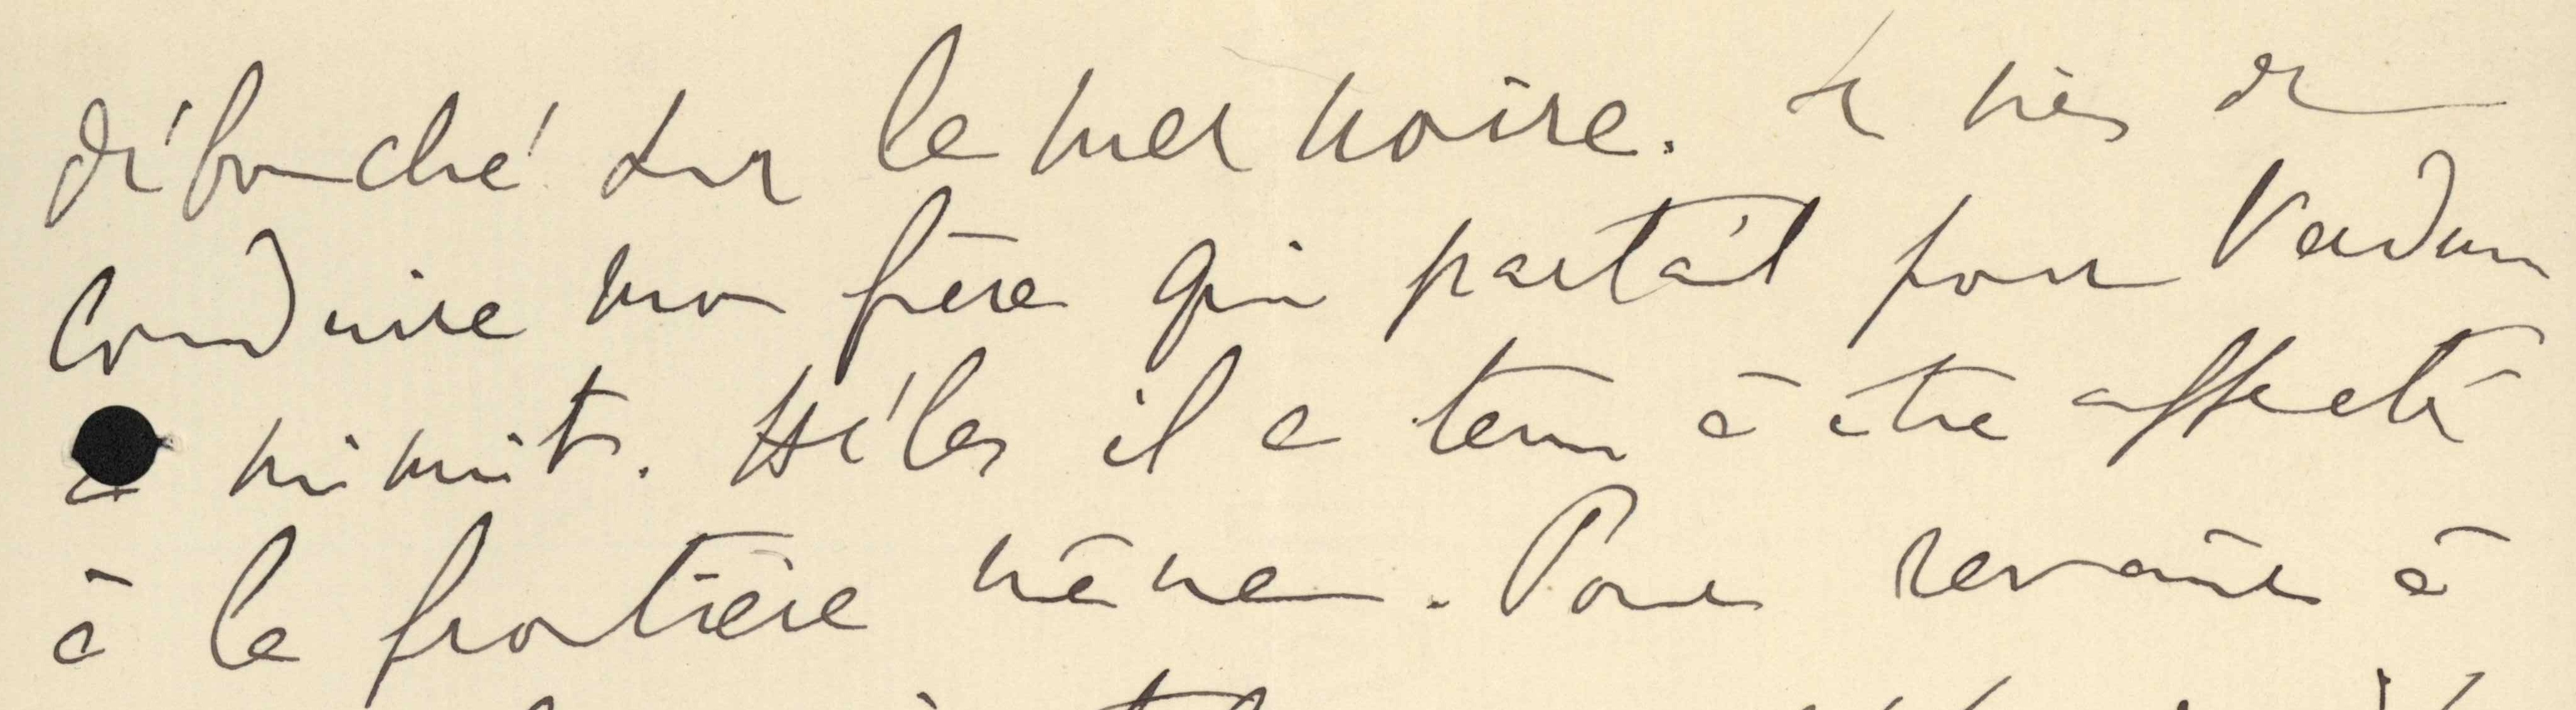 Letter from Marcel Proust to Lionel Hauser, 2 August 1914 (excerpt 2)